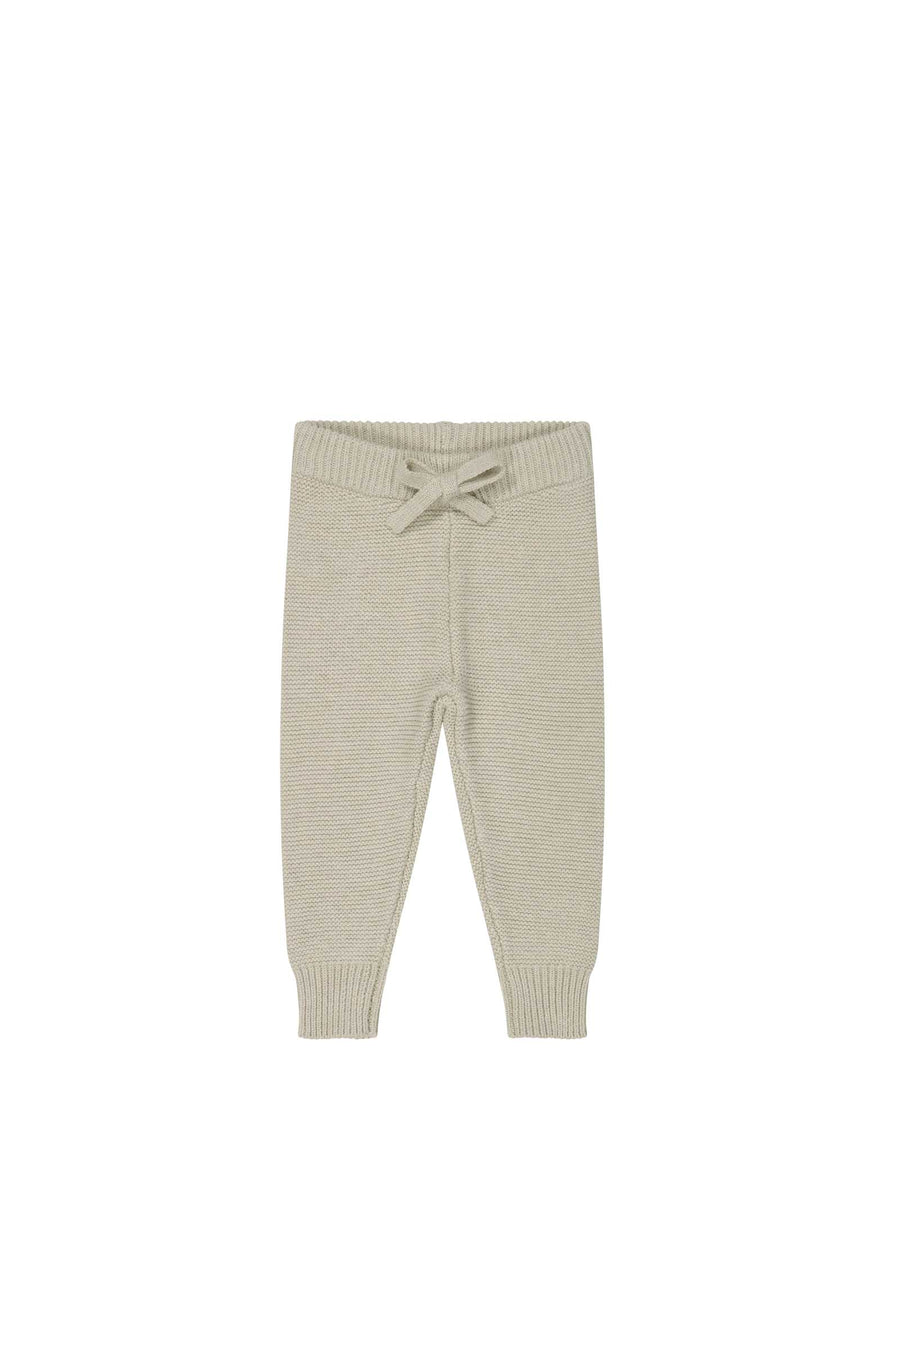 Ethan Pant - Sage Marle Childrens Pant from Jamie Kay NZ